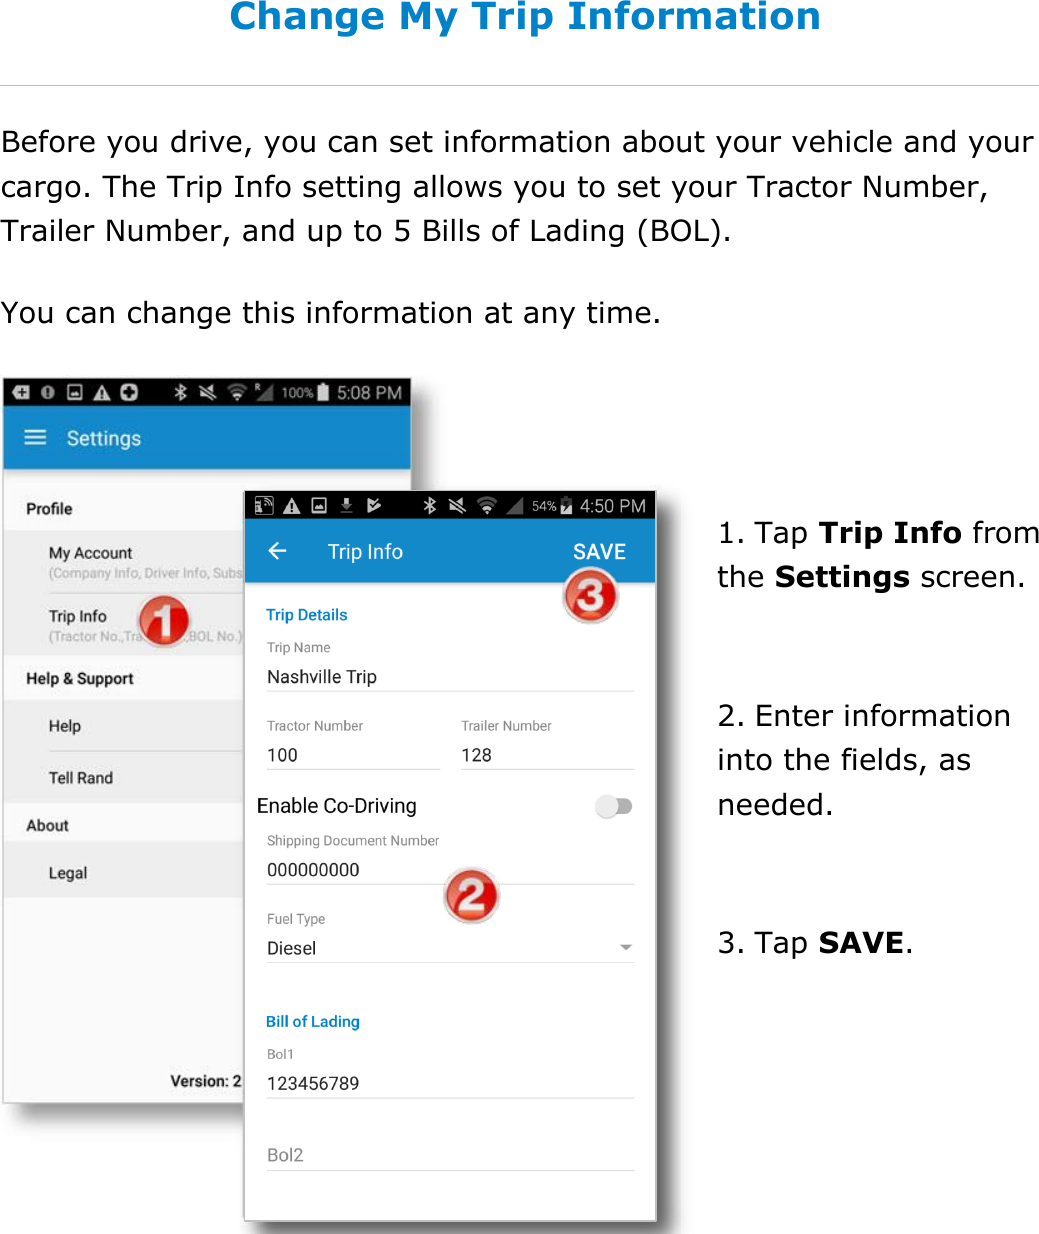  DriverConnect User Guide  90 © 2017, Rand McNally, Inc. Change My Trip Information Before you drive, you can set information about your vehicle and your cargo. The Trip Info setting allows you to set your Tractor Number, Trailer Number, and up to 5 Bills of Lading (BOL). You can change this information at any time.   1. Tap Trip Info from the Settings screen.  2. Enter information into the fields, as needed.  3. Tap SAVE.   